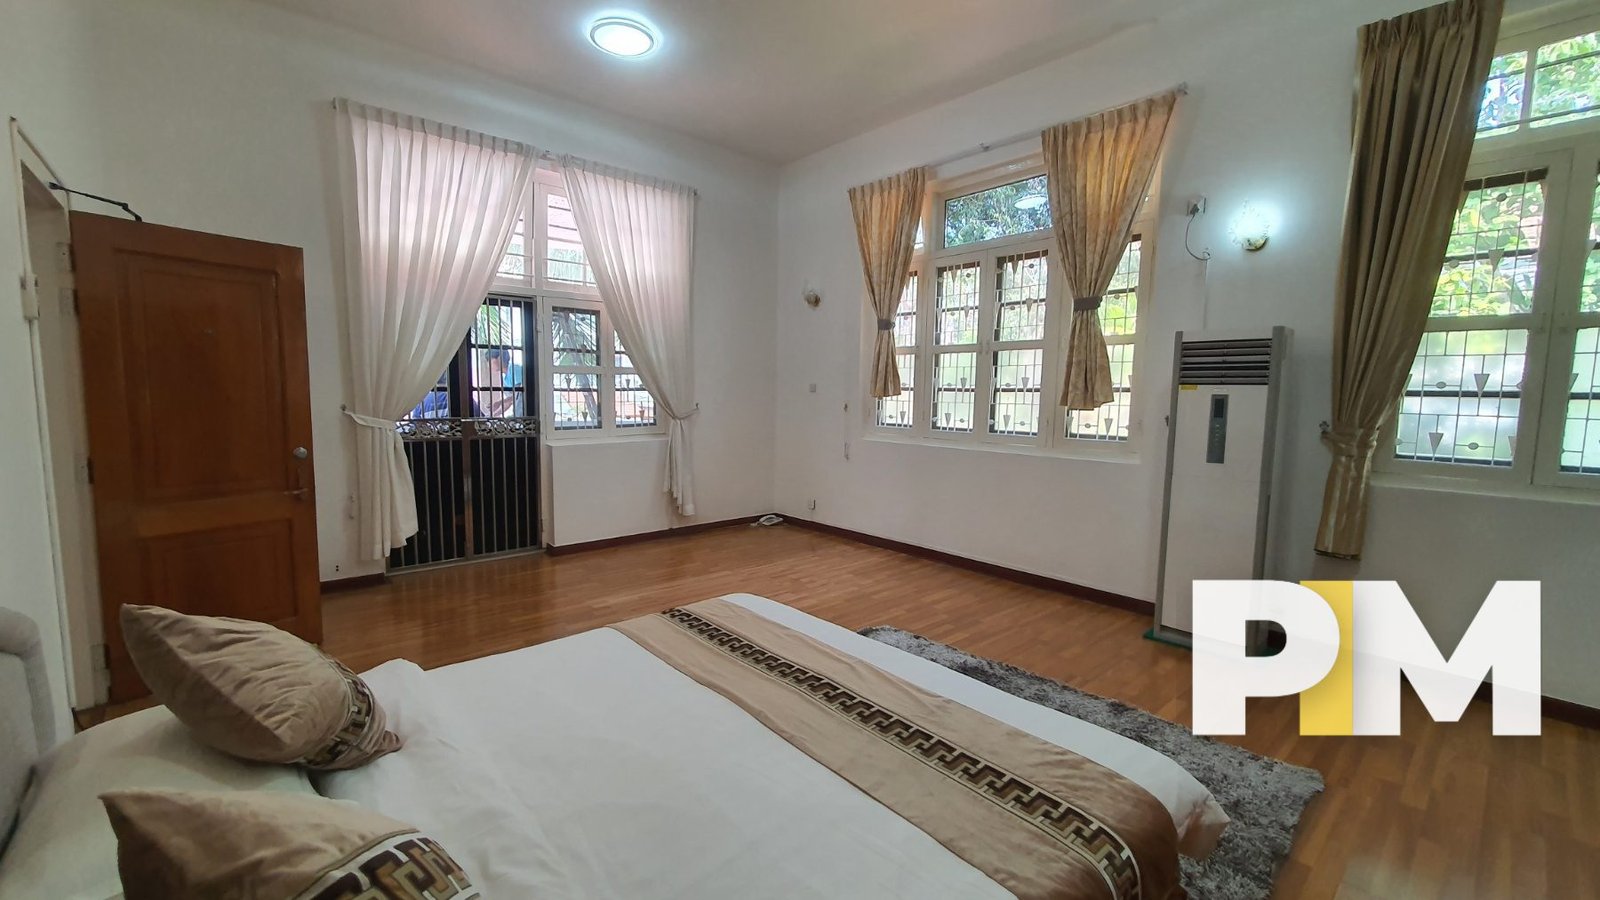 Bedroom with windows - Real Estate in Yangon